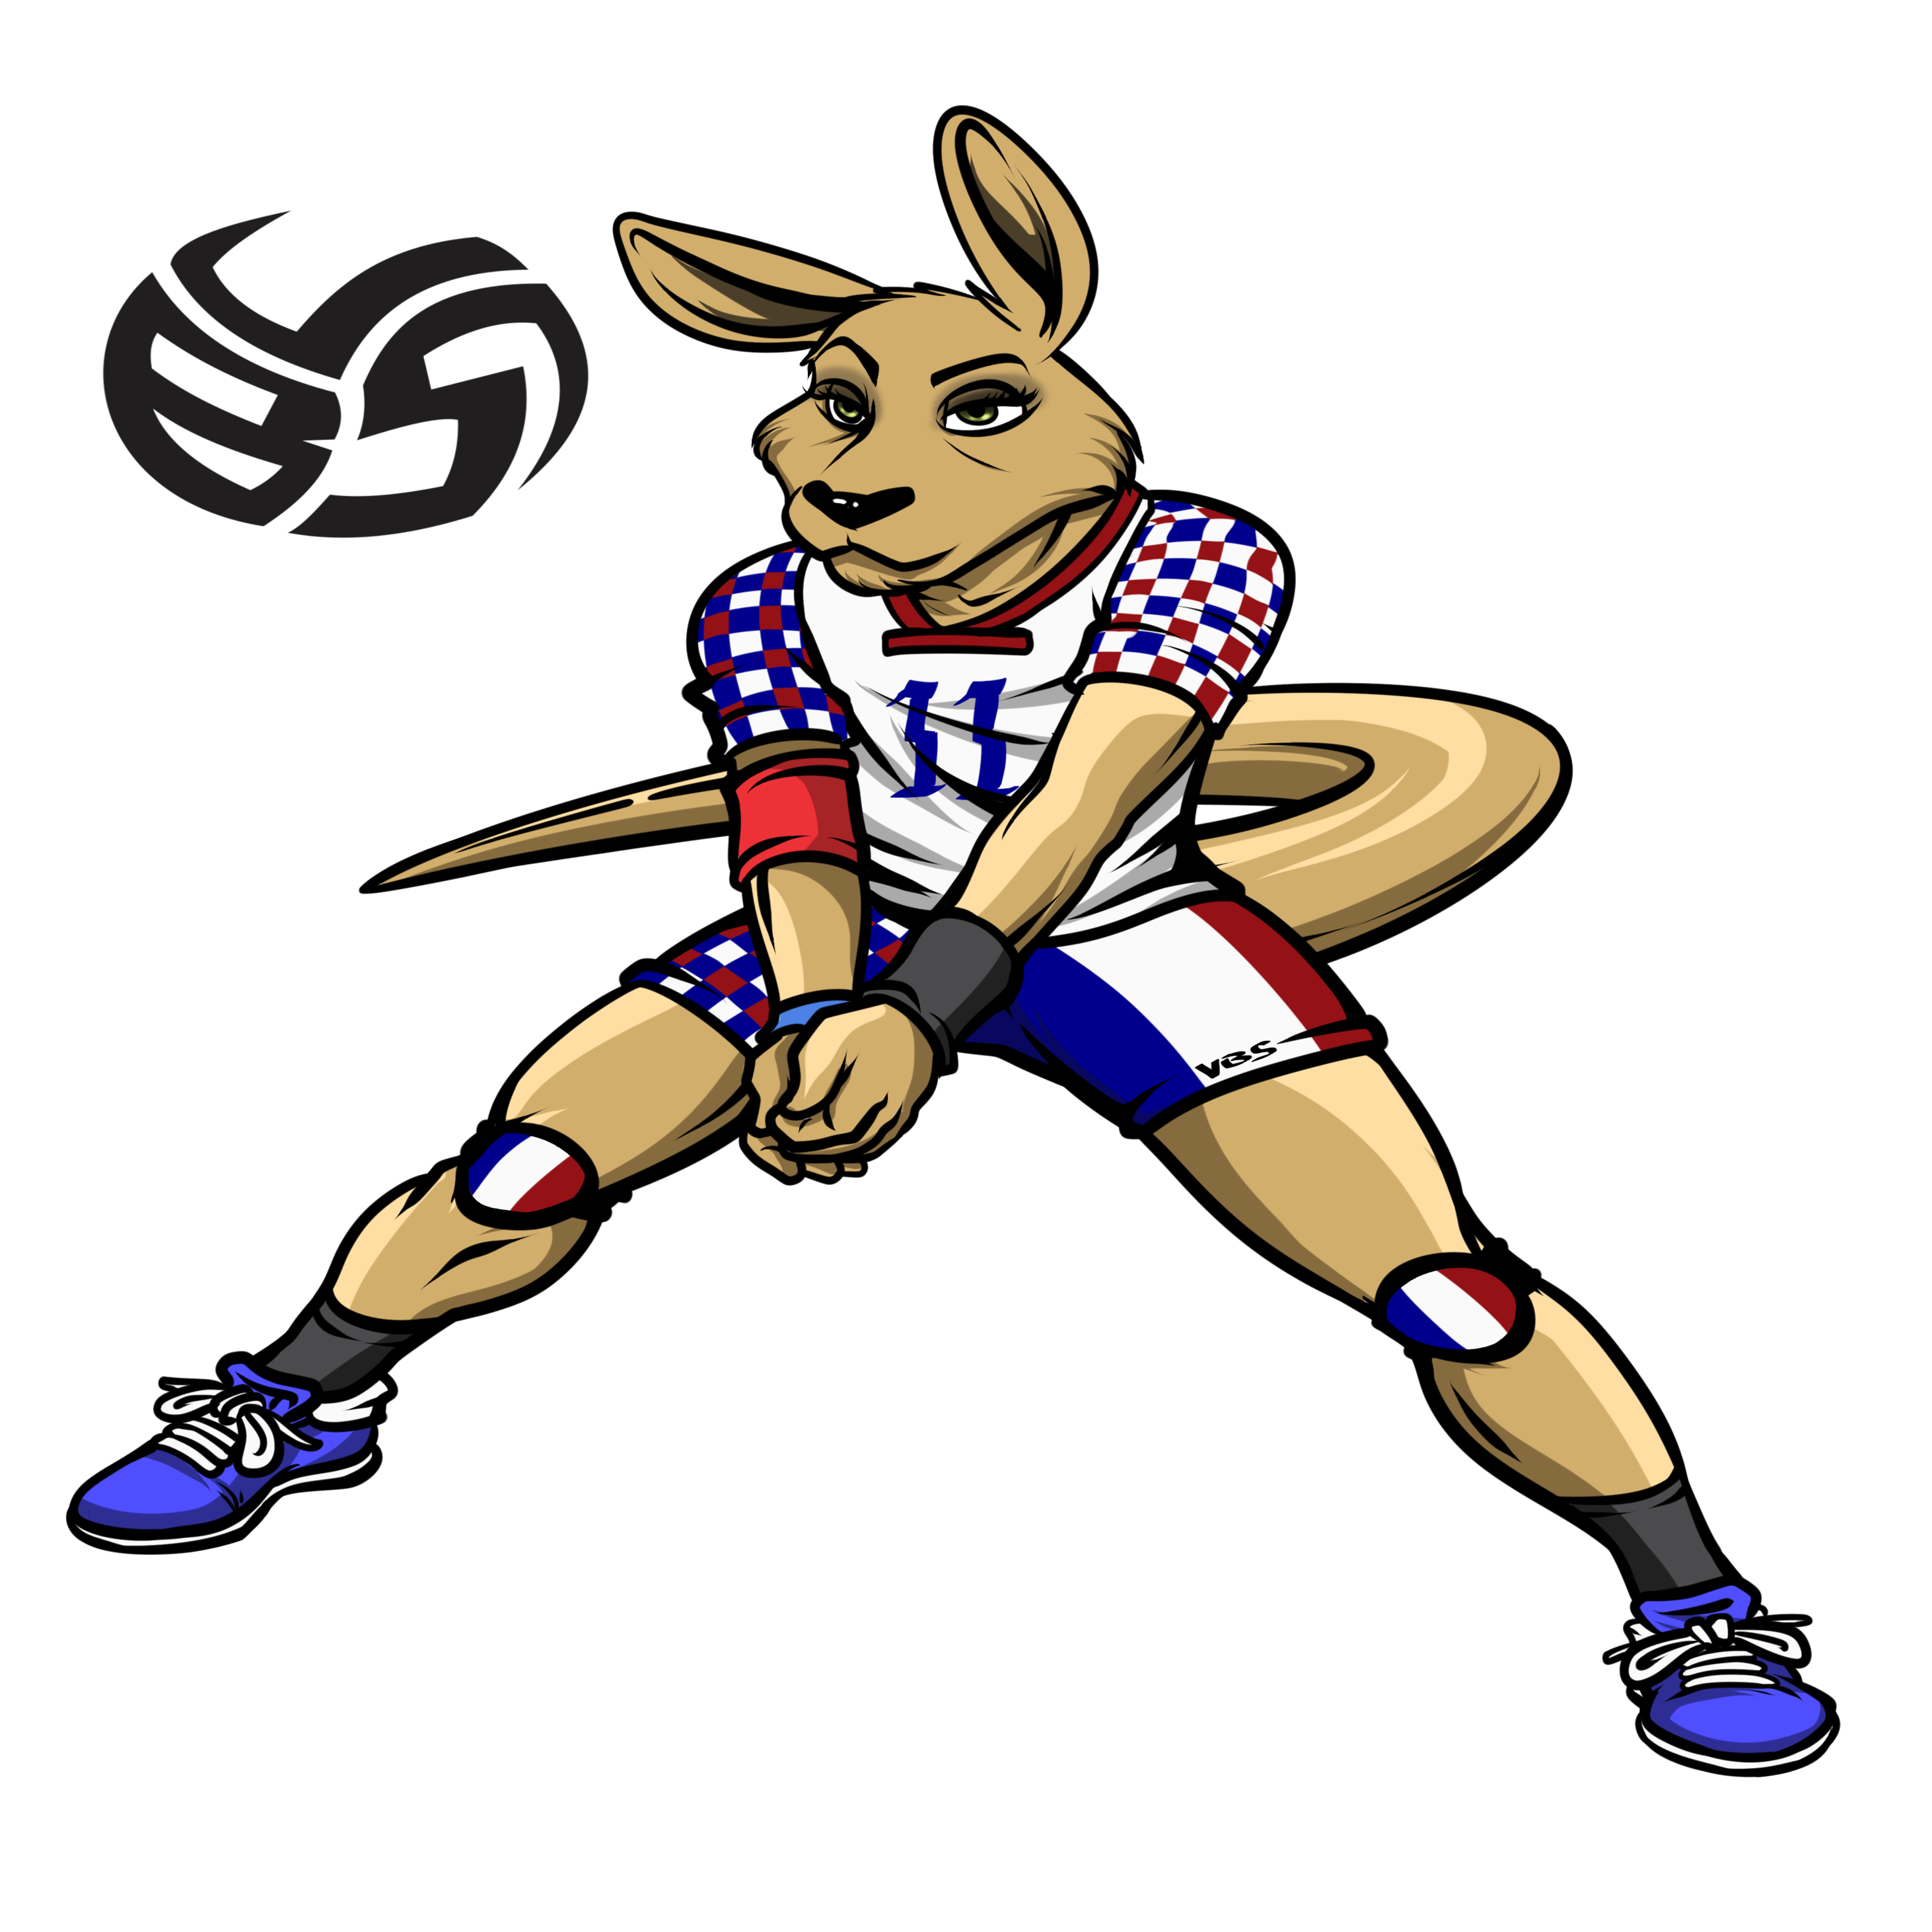 Meet Roo the Volleybragswag Kangaroo in France flag inspired uniform. Find fun animal lover t shirt ideas that're uniquely designed gifts celebrating volleyball athletes with goals.